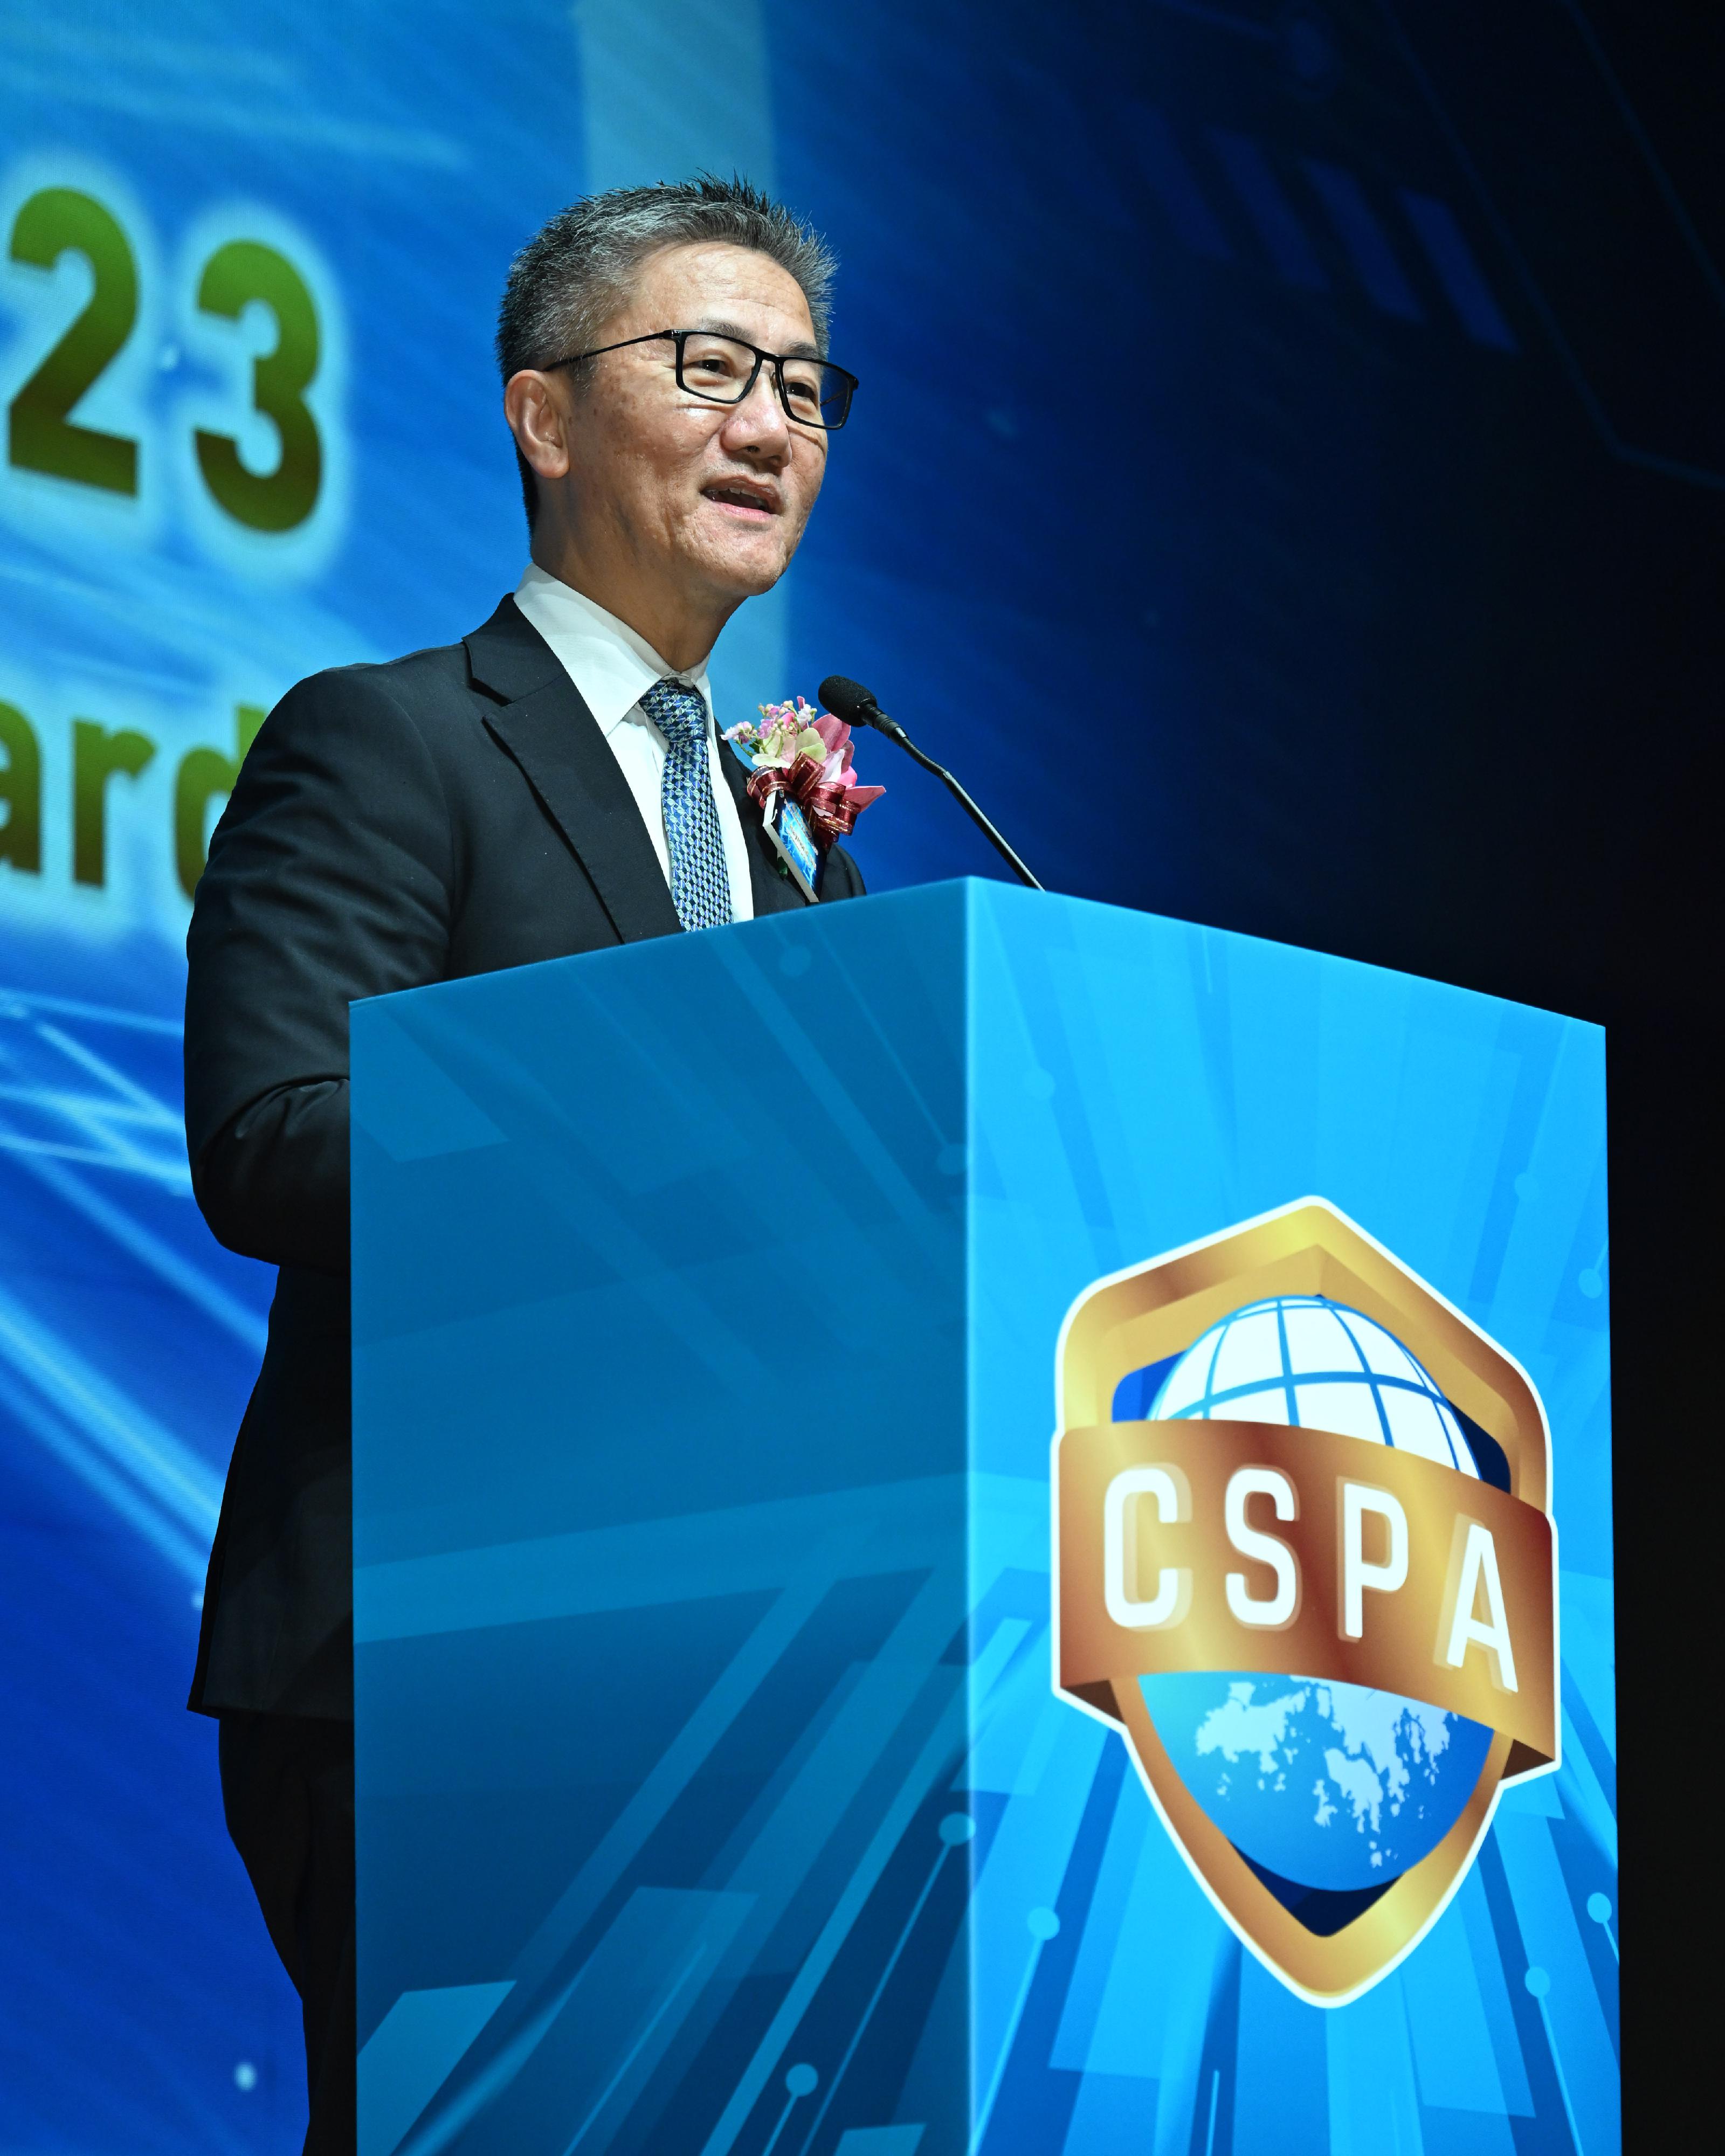 The Commissioner of Police, Mr Siu Chak-yee, delivers an opening speech at the Cyber Security Professional Awards 2023 presentation ceremony today (February 29).